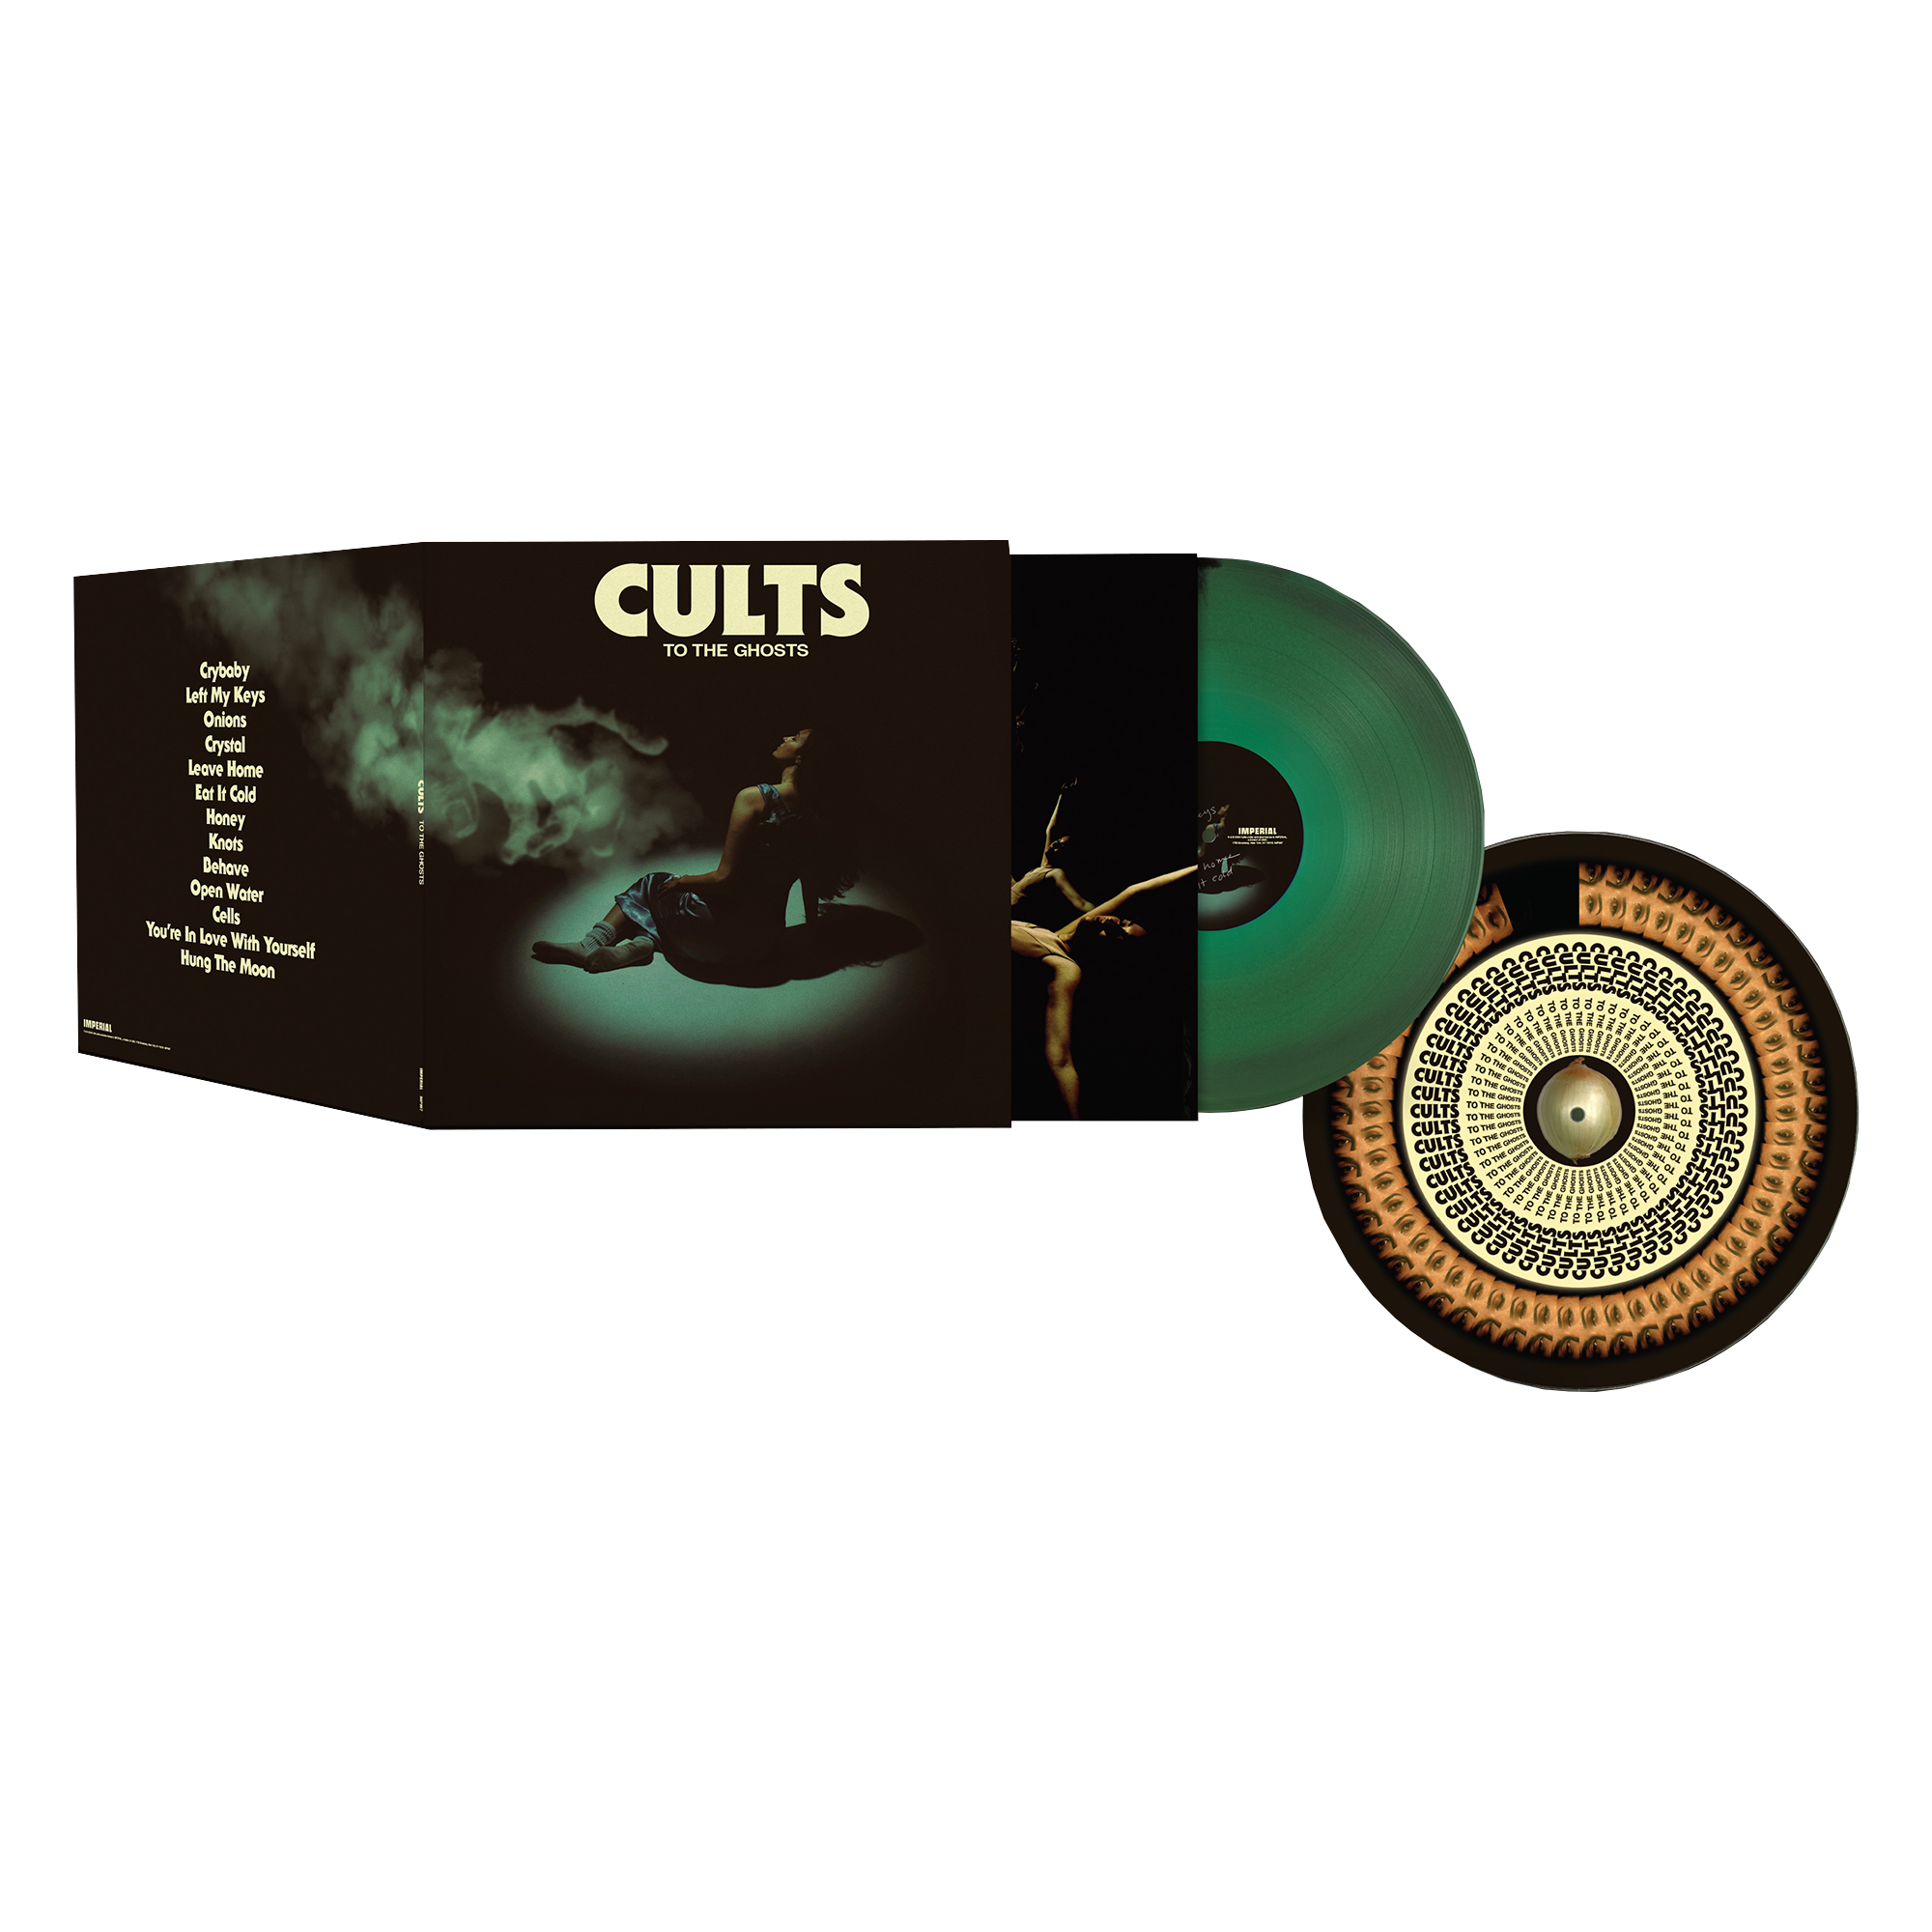 Cults - To The Ghosts: Limited Green LP & Signed Zoetrope Slipmat